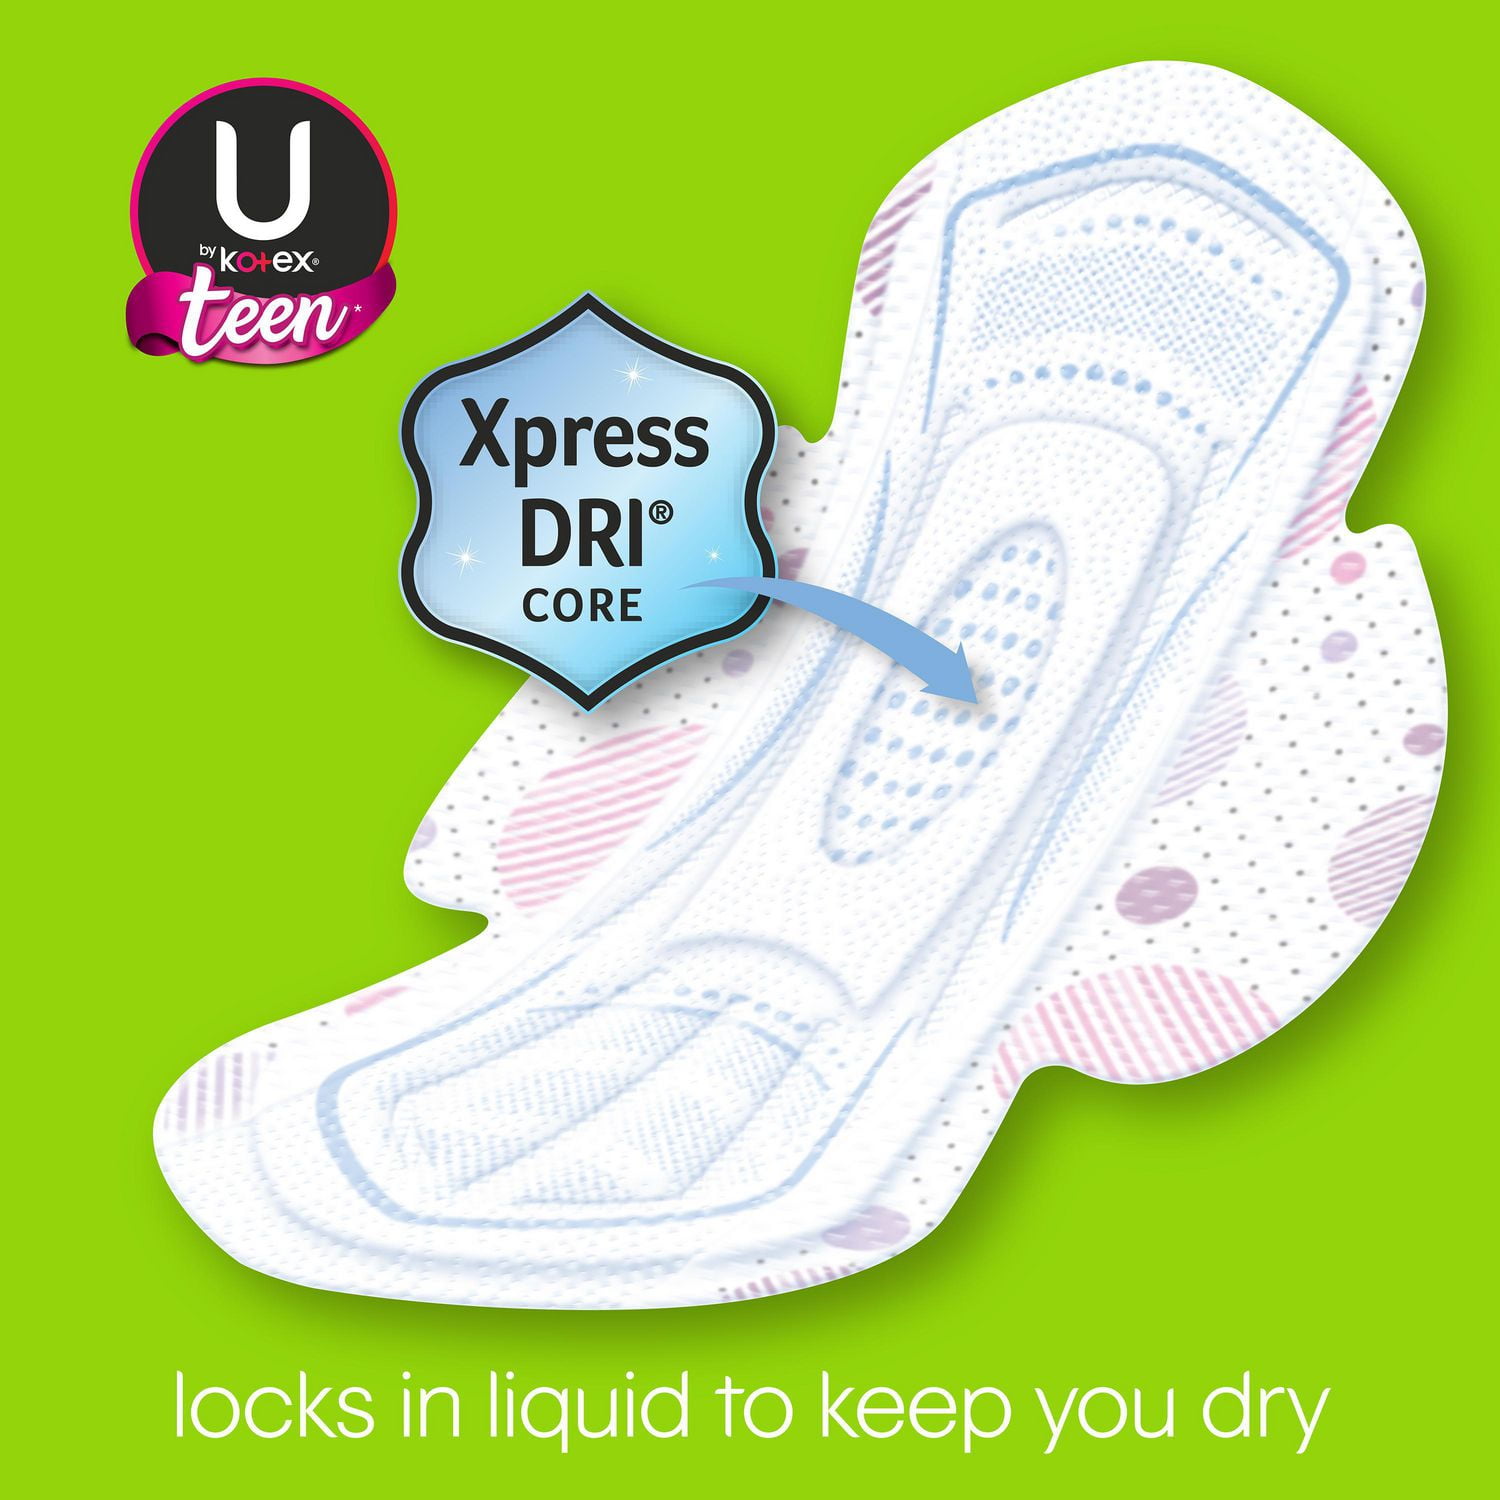 U by Kotex Ultra Thin Teen Pads with Wings, Extra Absorbency, Unscented 